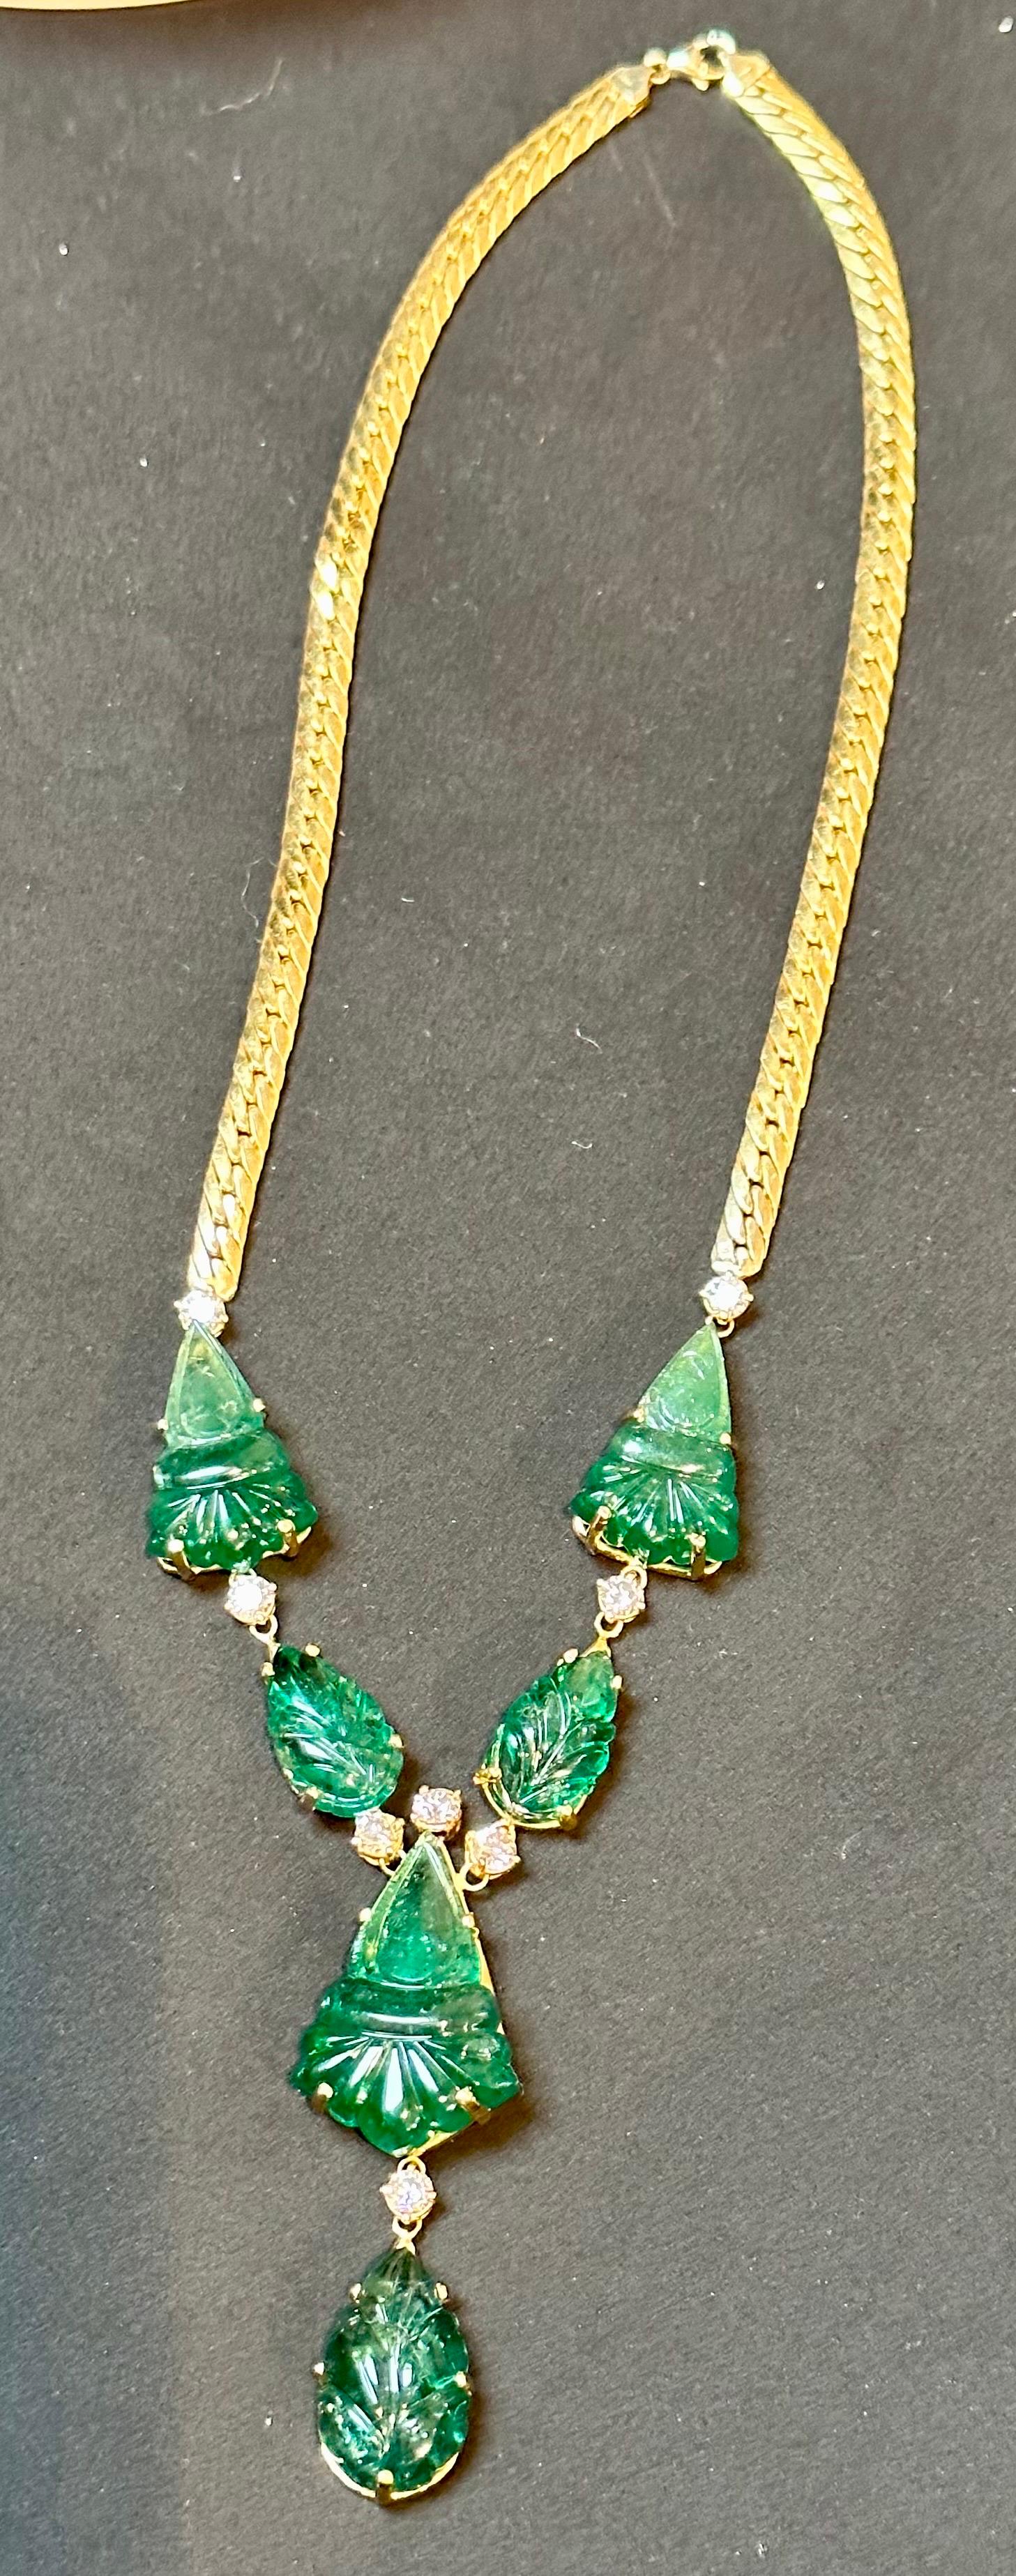 115 Ct Natural Carved Drop Emerald & 4 Ct Diamond  Necklace 18 Kt Gold Necklace For Sale 5